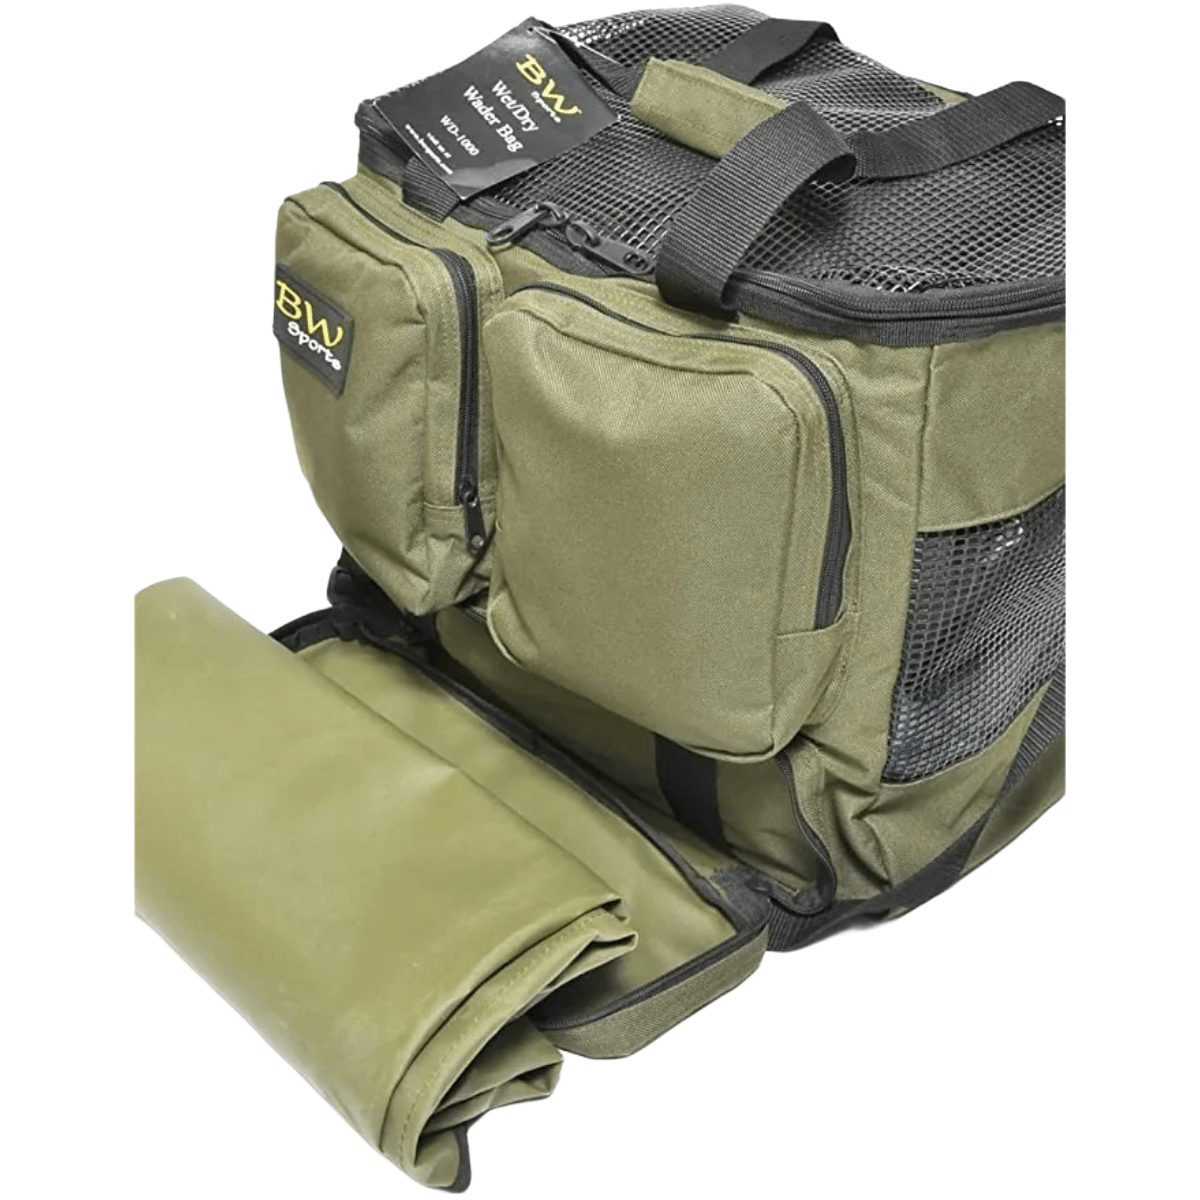 B W Sports Waders And Wading Boots Storage Carry Bag 